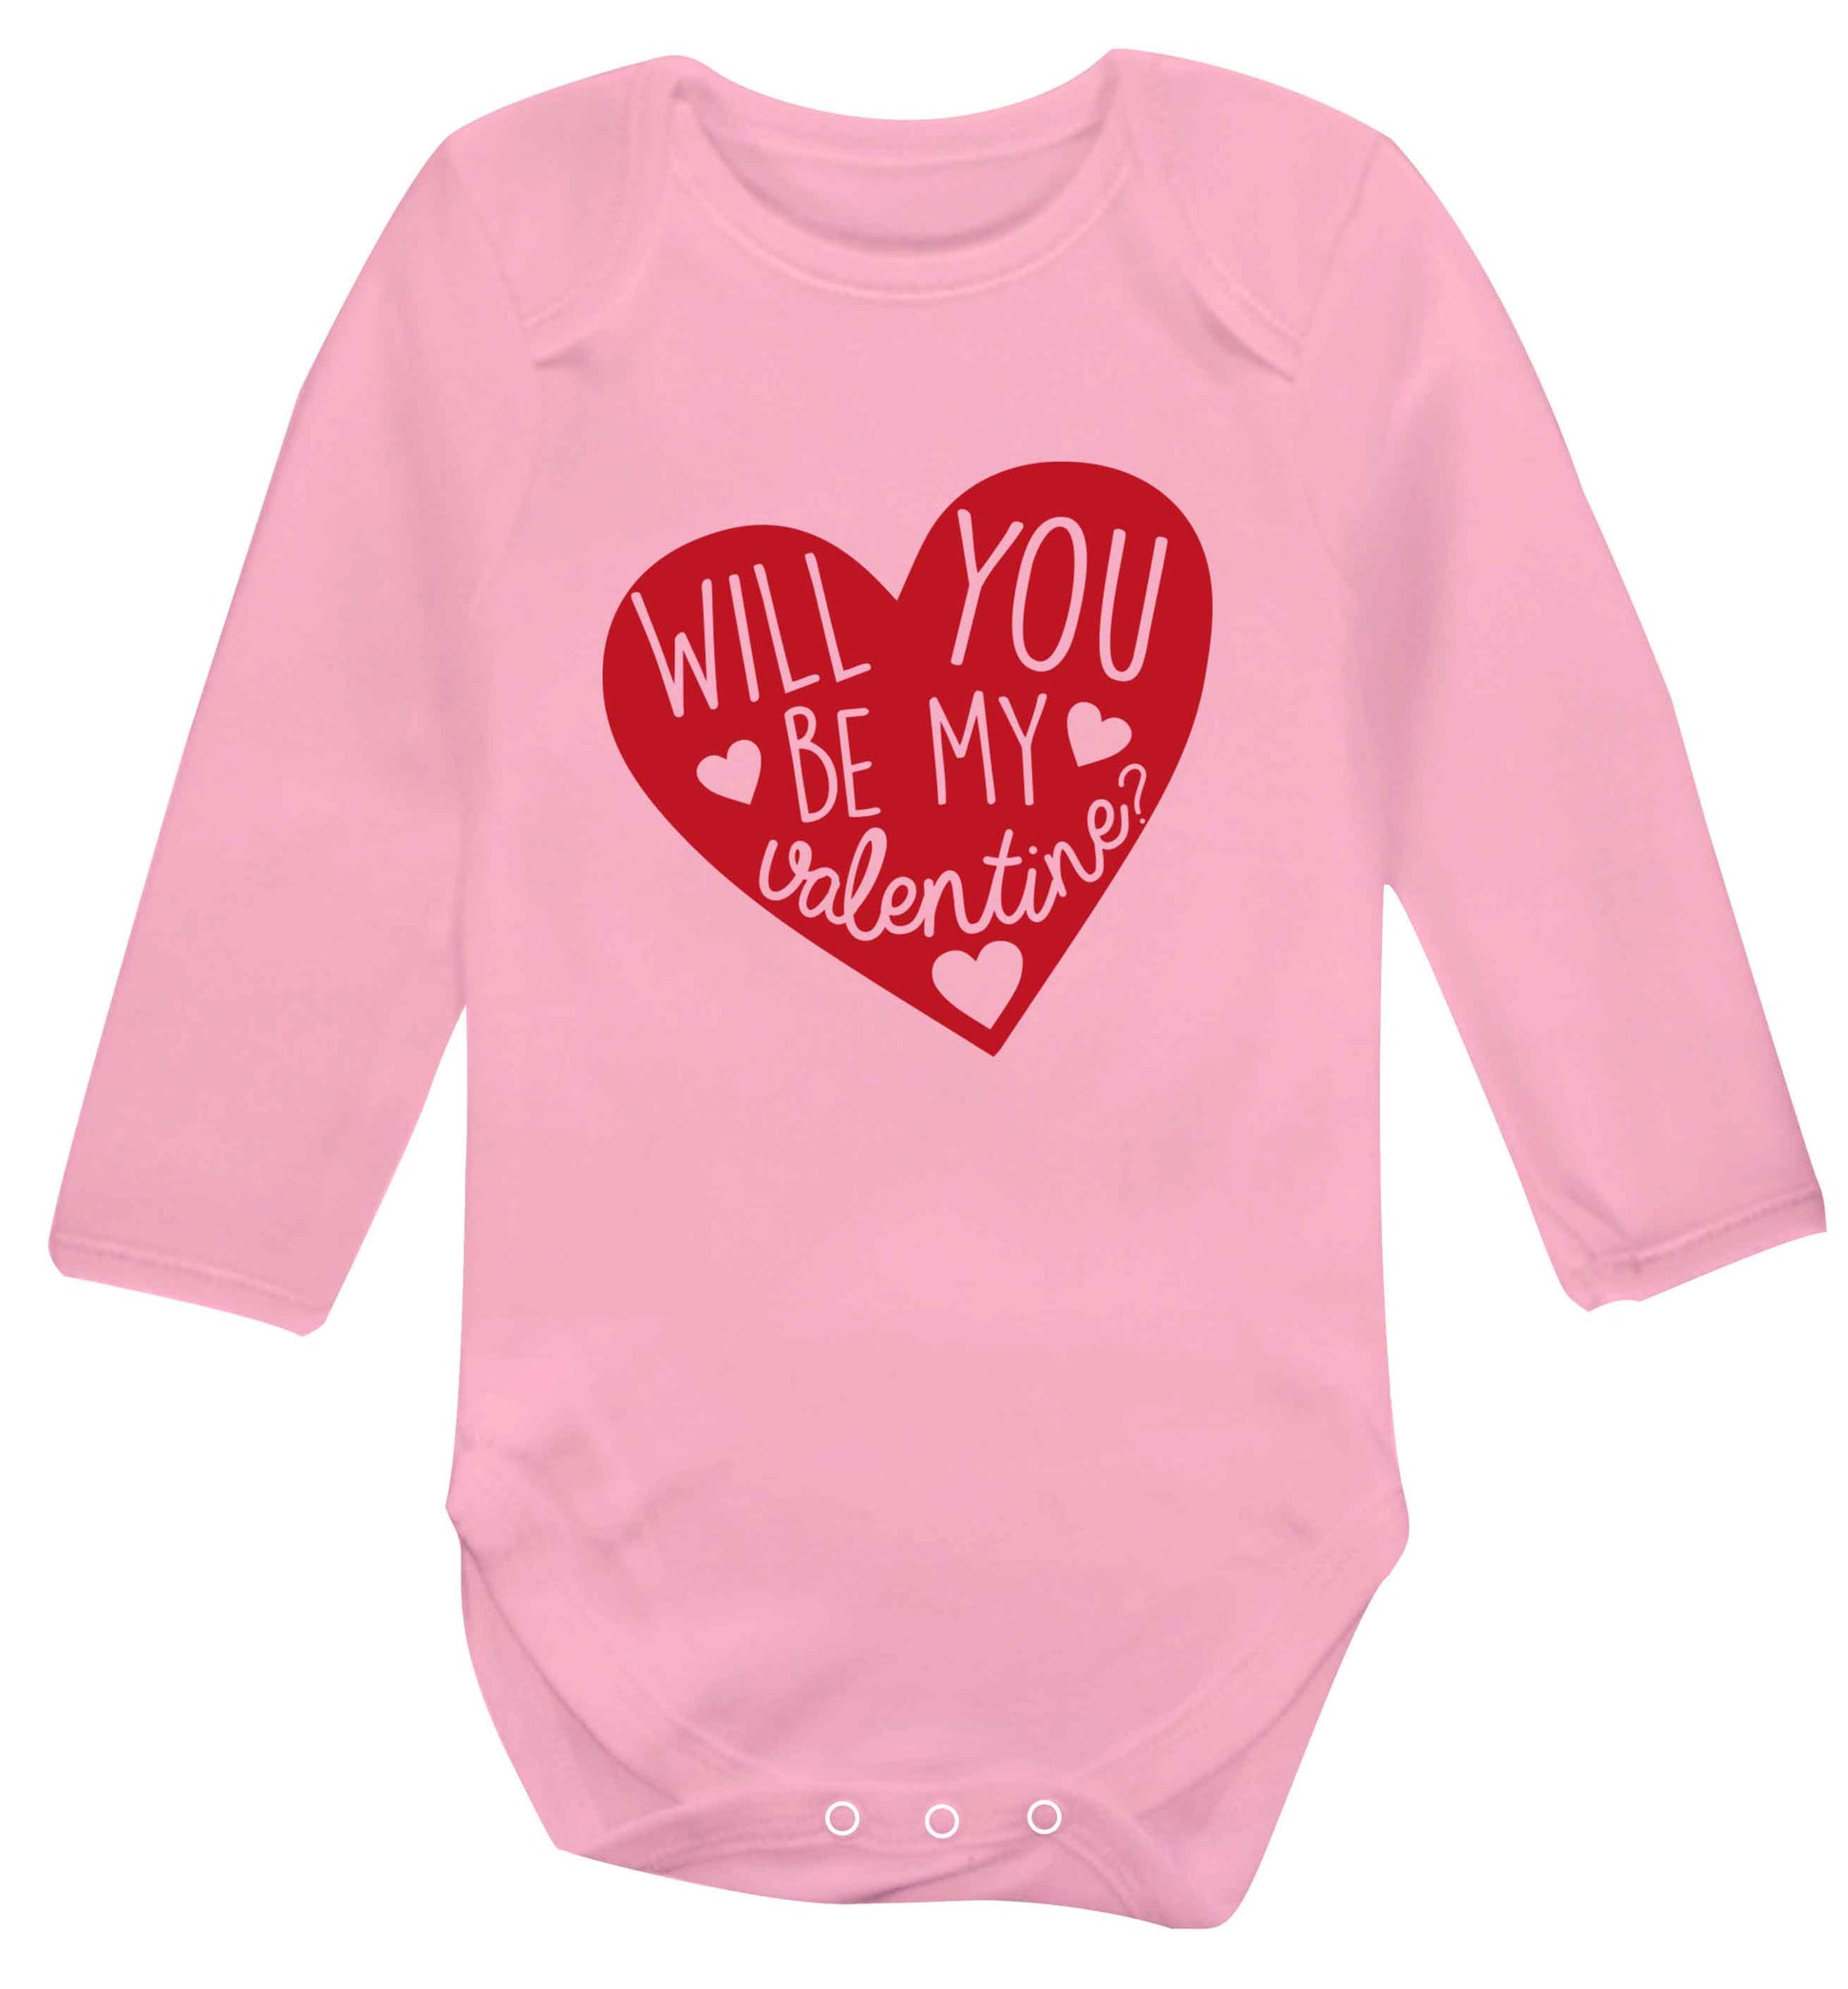 Will you be my valentine? baby vest long sleeved pale pink 6-12 months